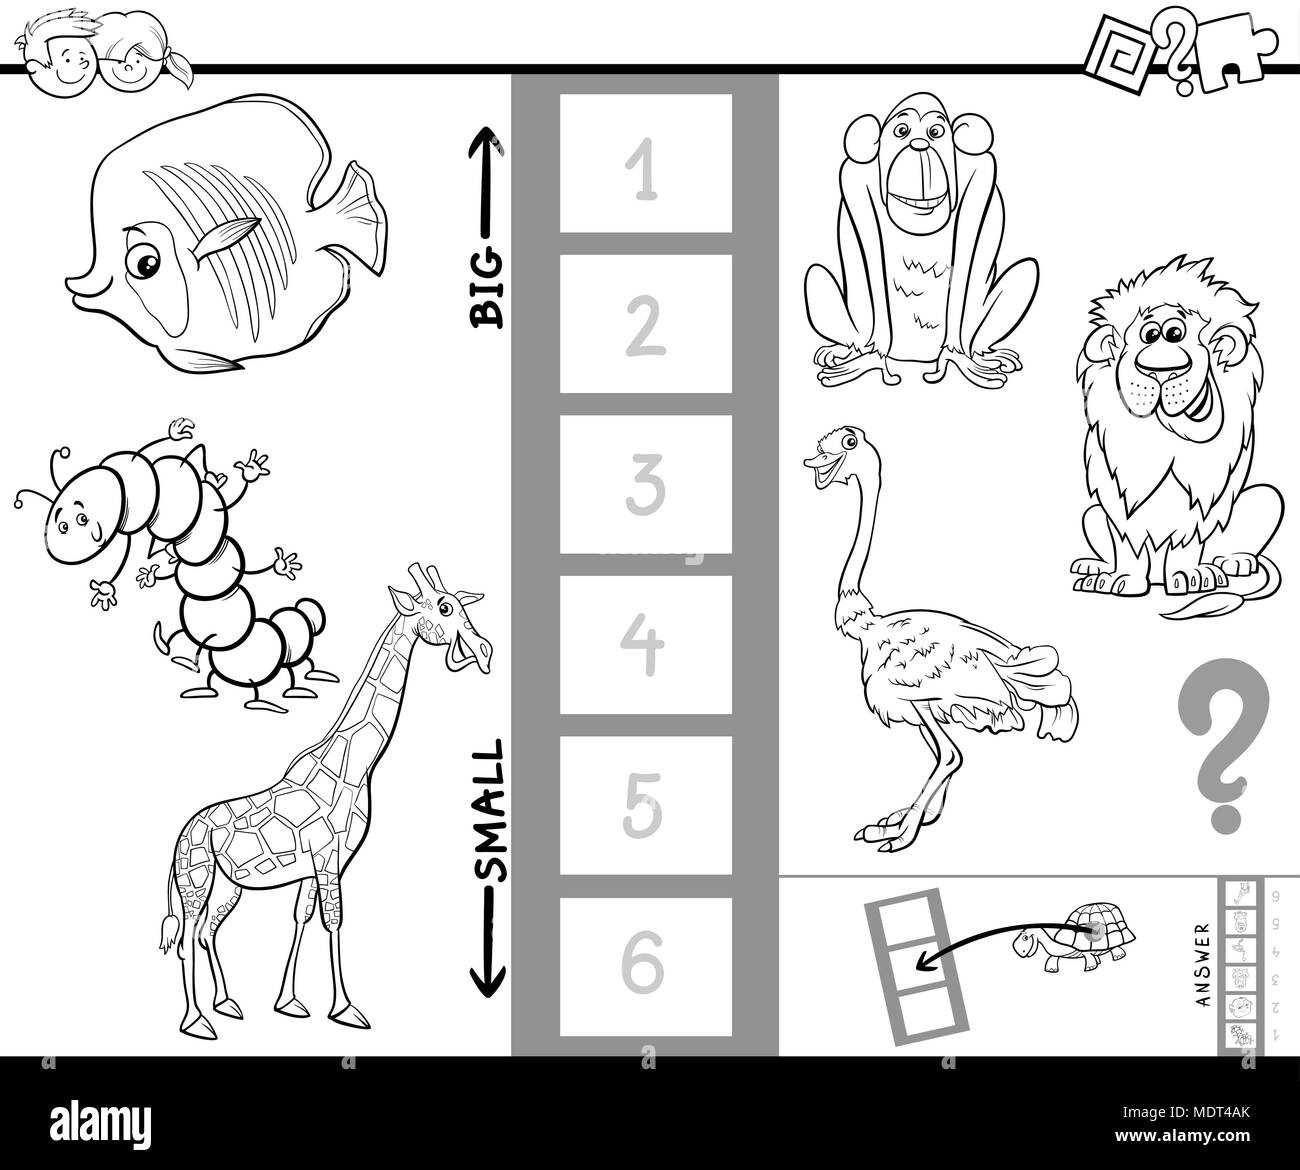 Black and White Cartoon Illustration of Educational Game of Finding the Largest and the Smallest Animal with Funny Characters for Children Coloring Bo Stock Vector